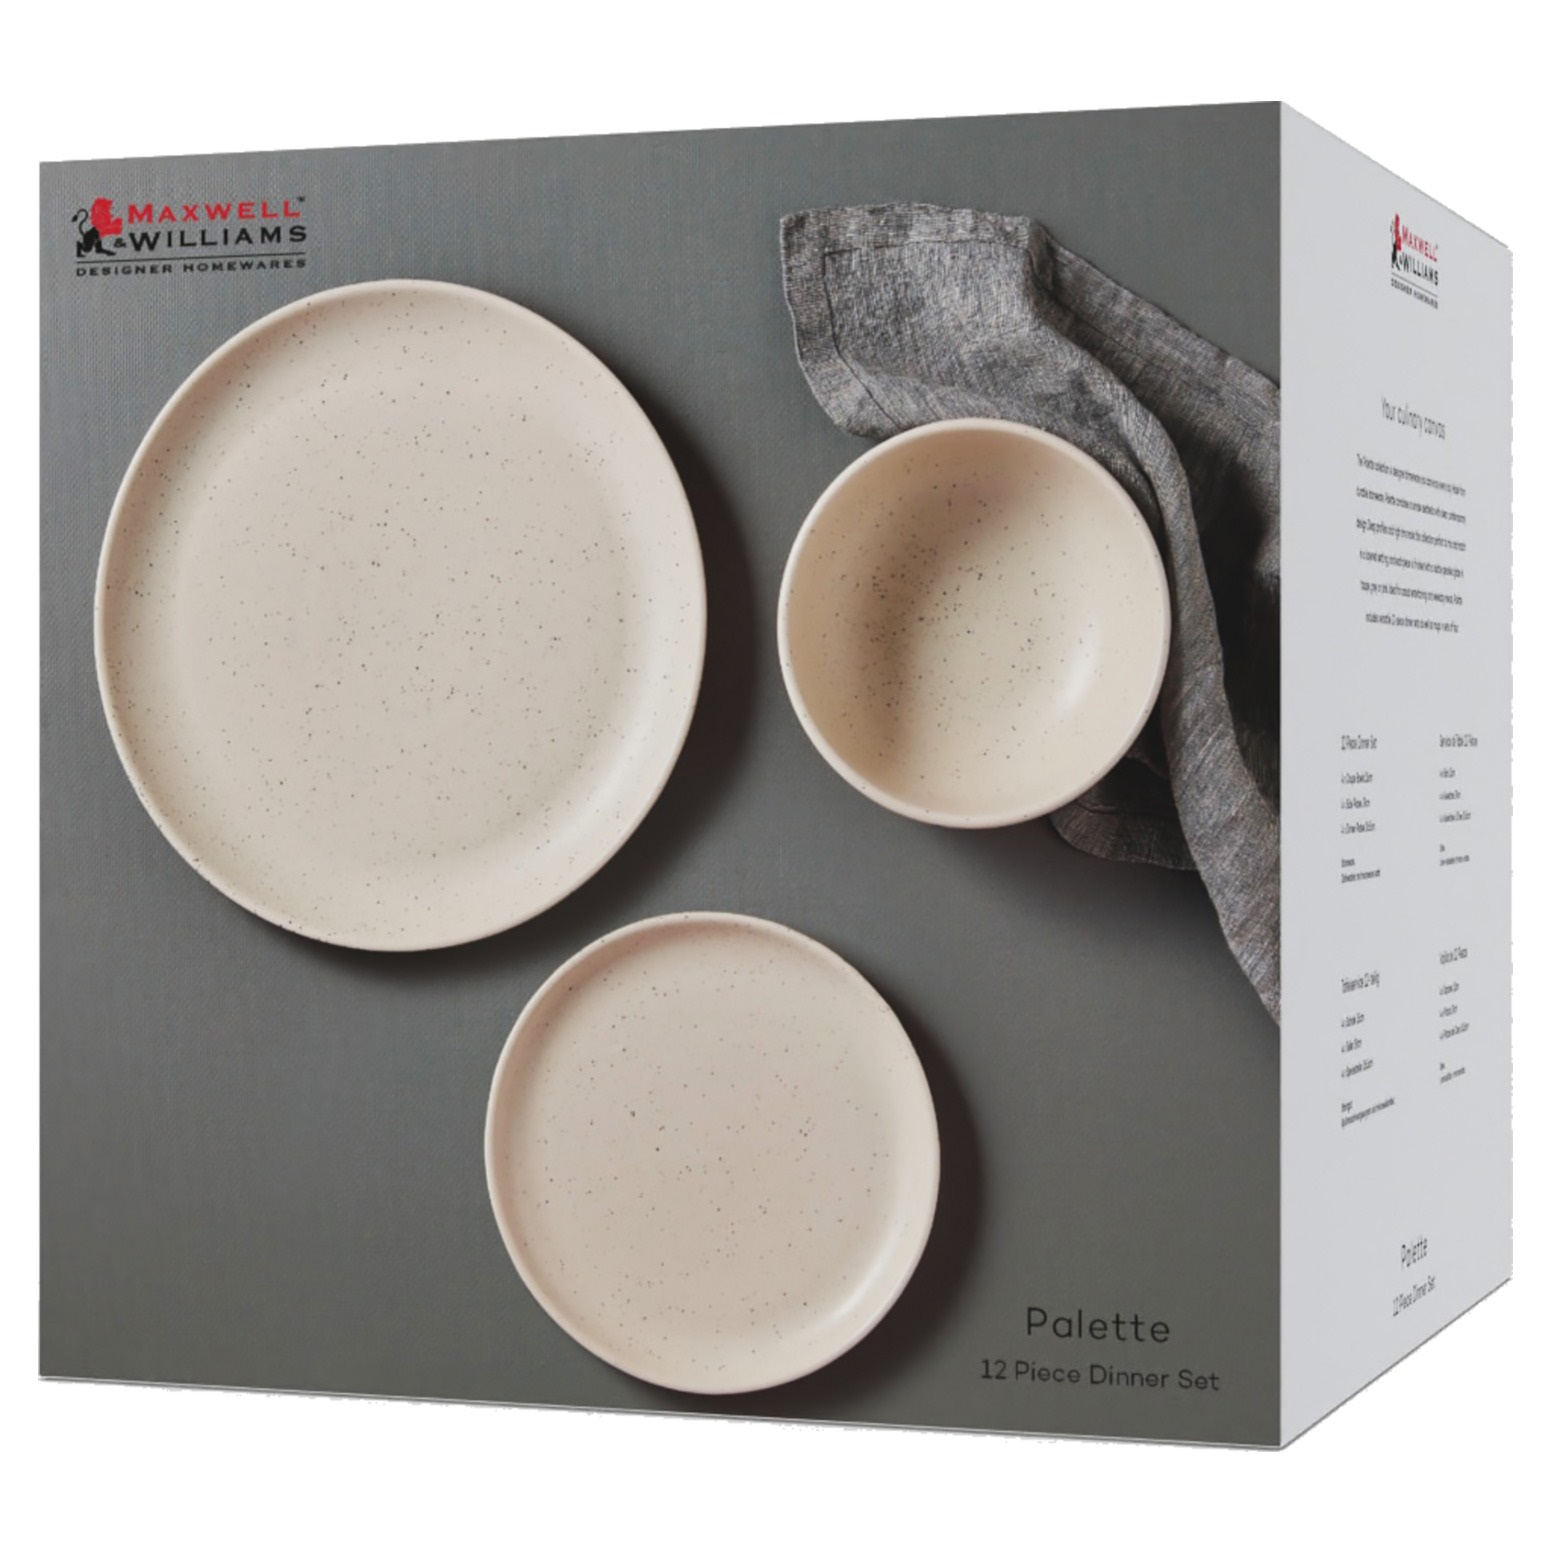 Maxwell & Williams Palette Dinner Set 12pc Cream Speckle Gift Boxed